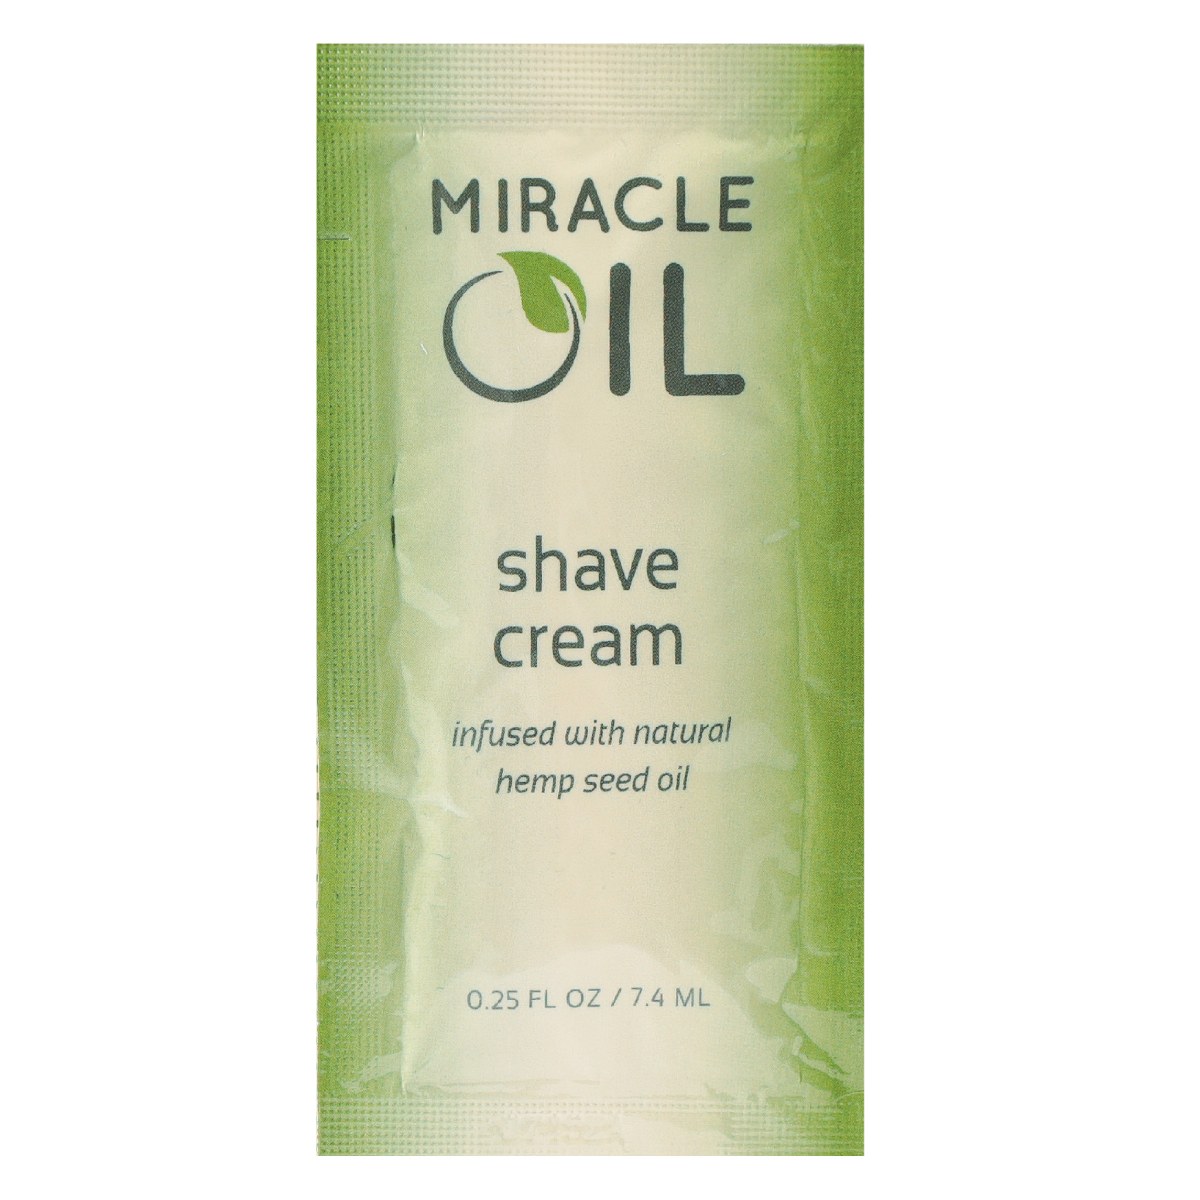 Sample Miracle Oil Shave Cream